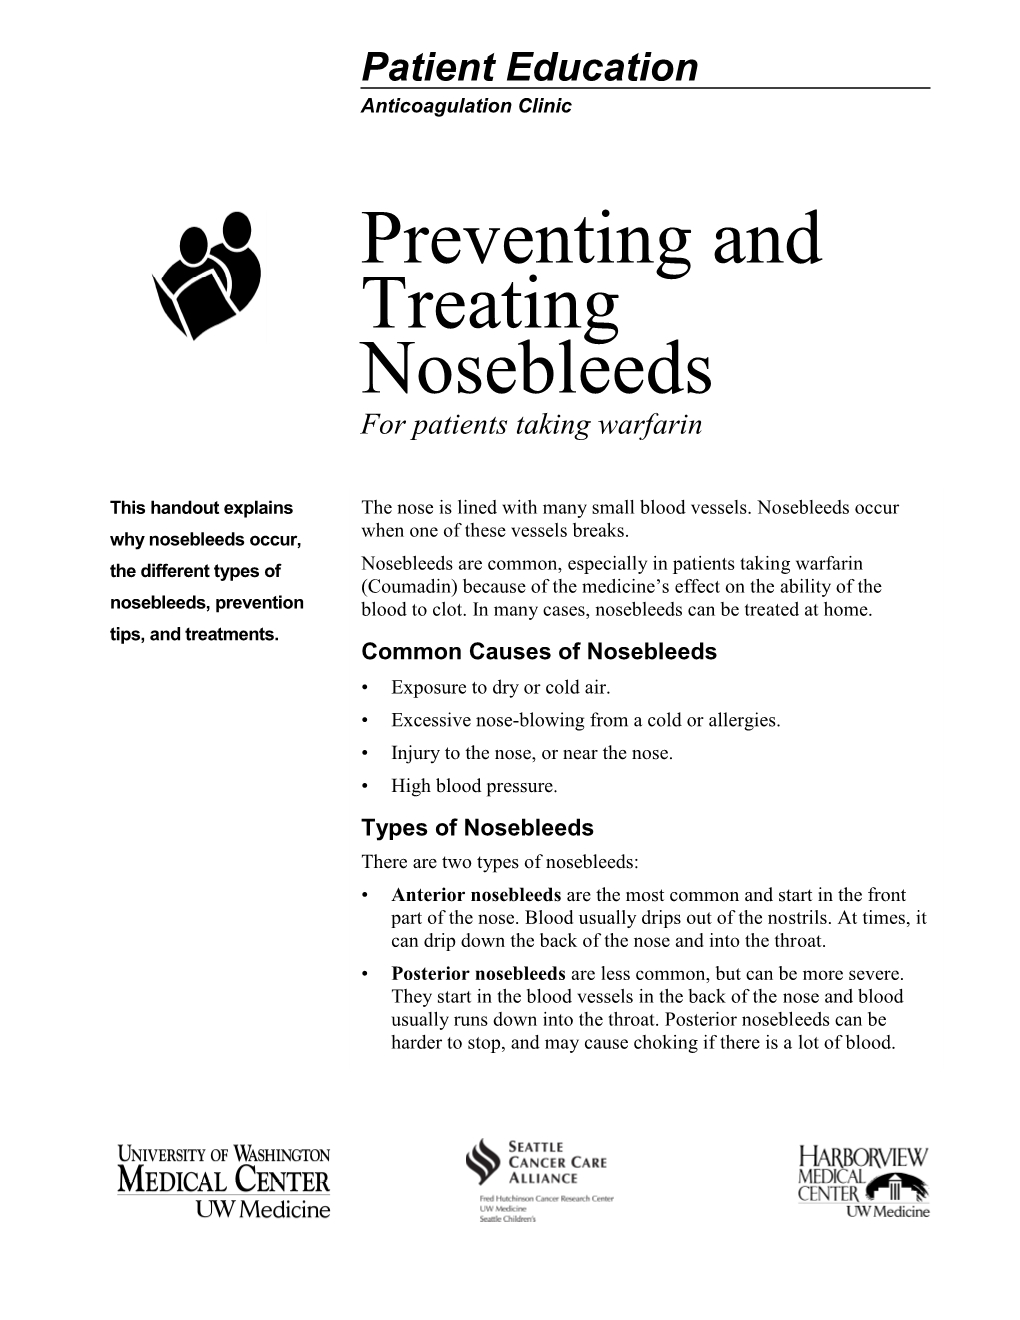 Preventing and Treating Nosebleeds for Patients Taking Warfarin